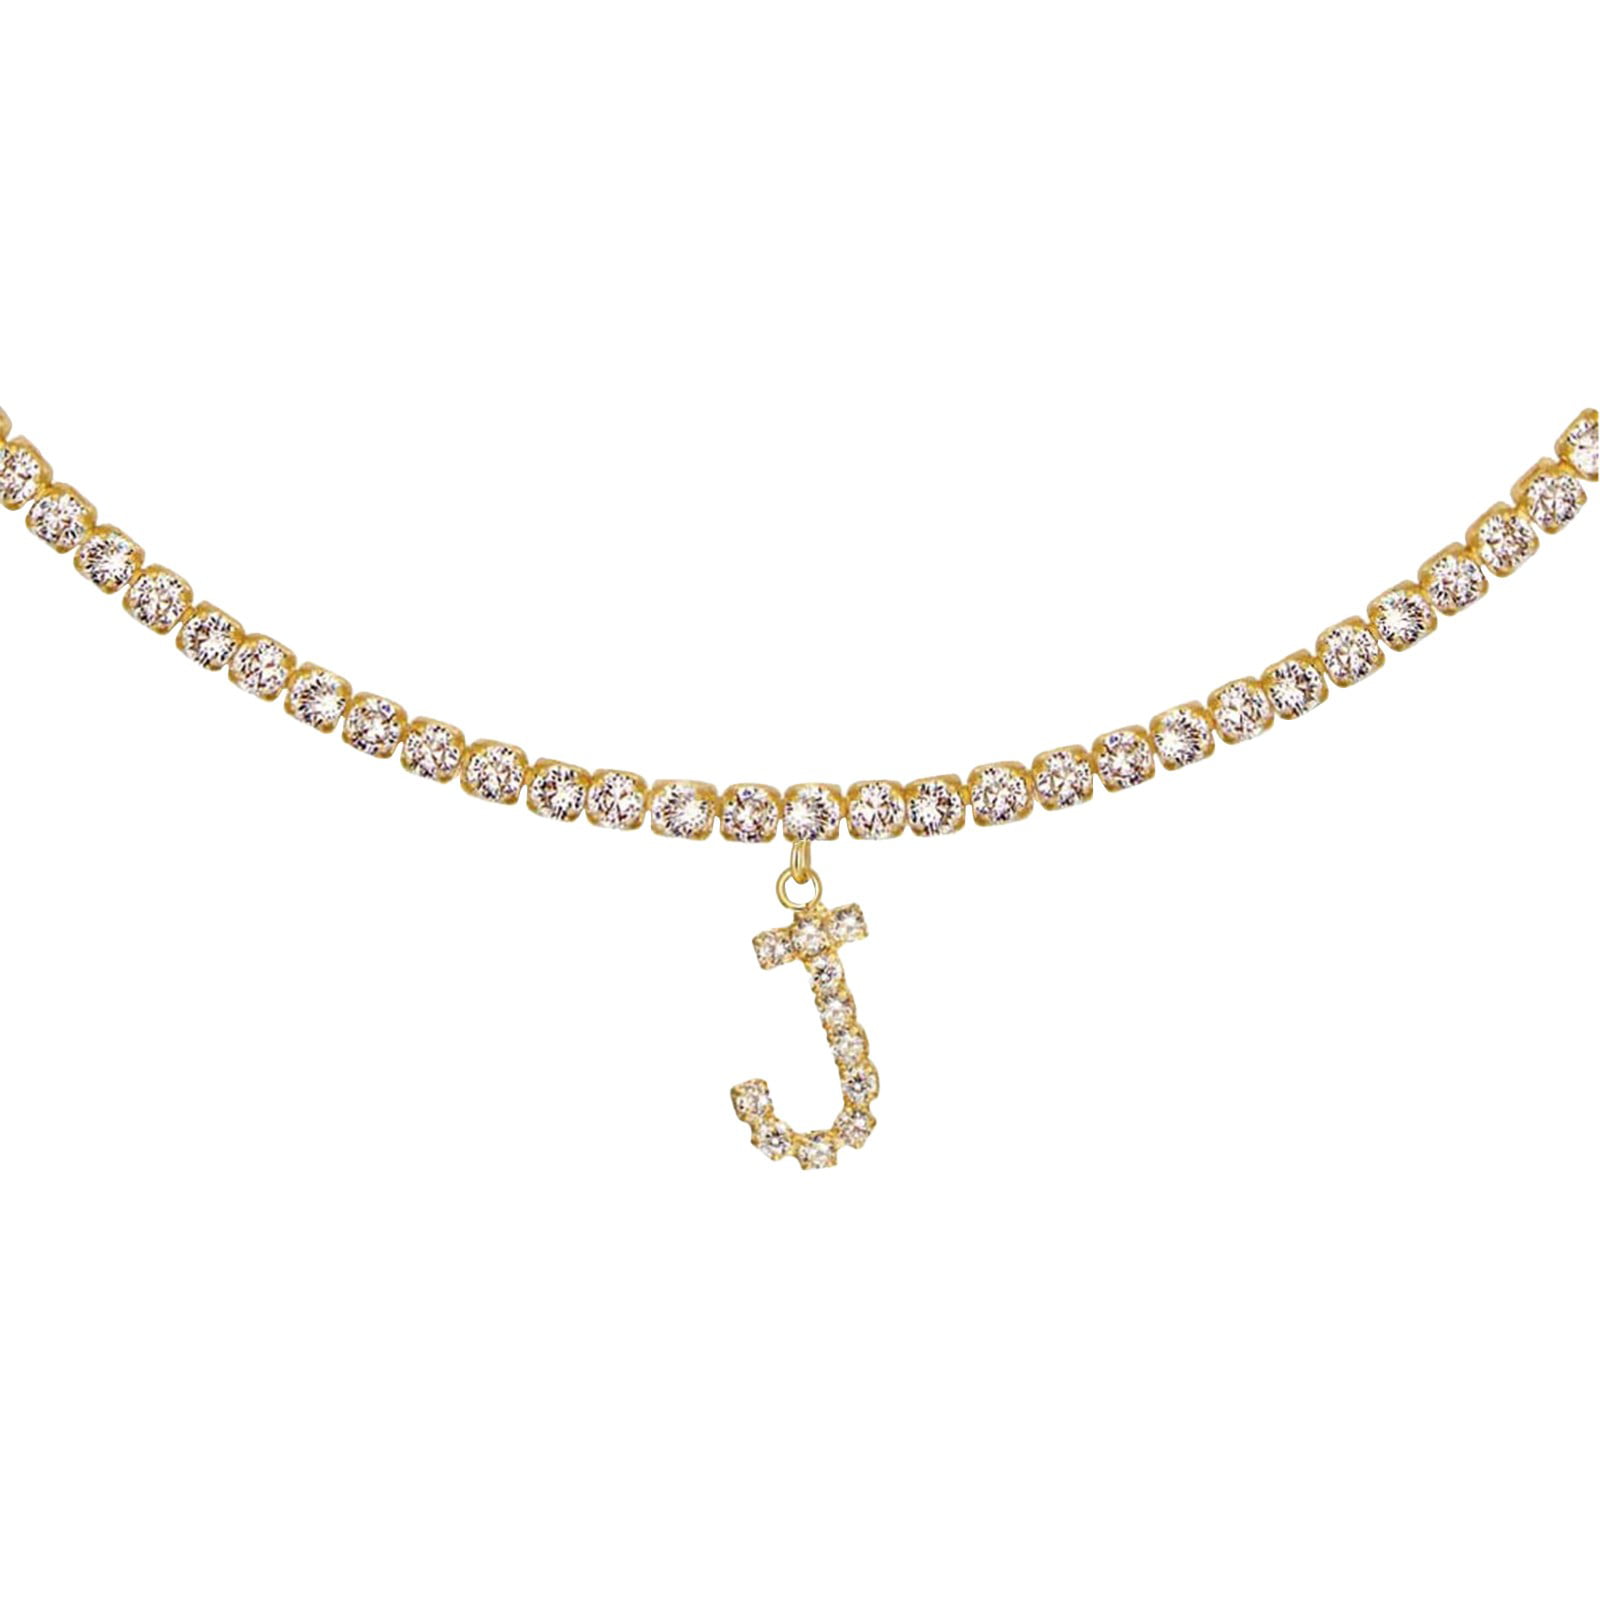 Details about   Real 18K Yellow Gold Filled Hypo-allergenic 20inch 1.2mm Thin Box Chain Necklace 